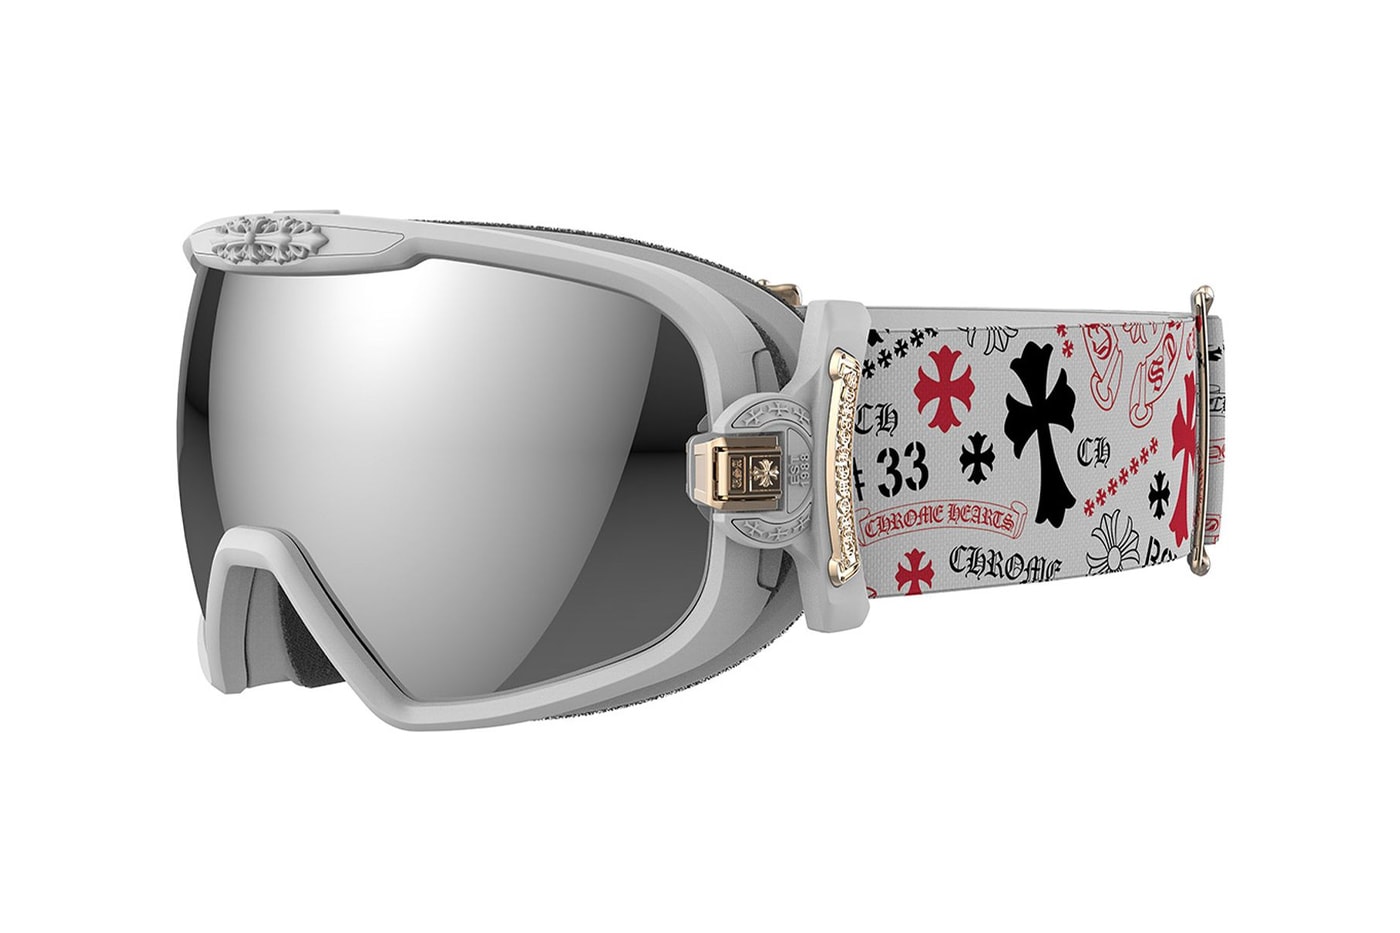 Chrome hearts snow goggles slopes carl zeiss frames  enhance contrast low light uv protection waterproof coating thermoplastic materials silcone rubber accents moisture wick foam black red white slime greensilver 1550 USD release info